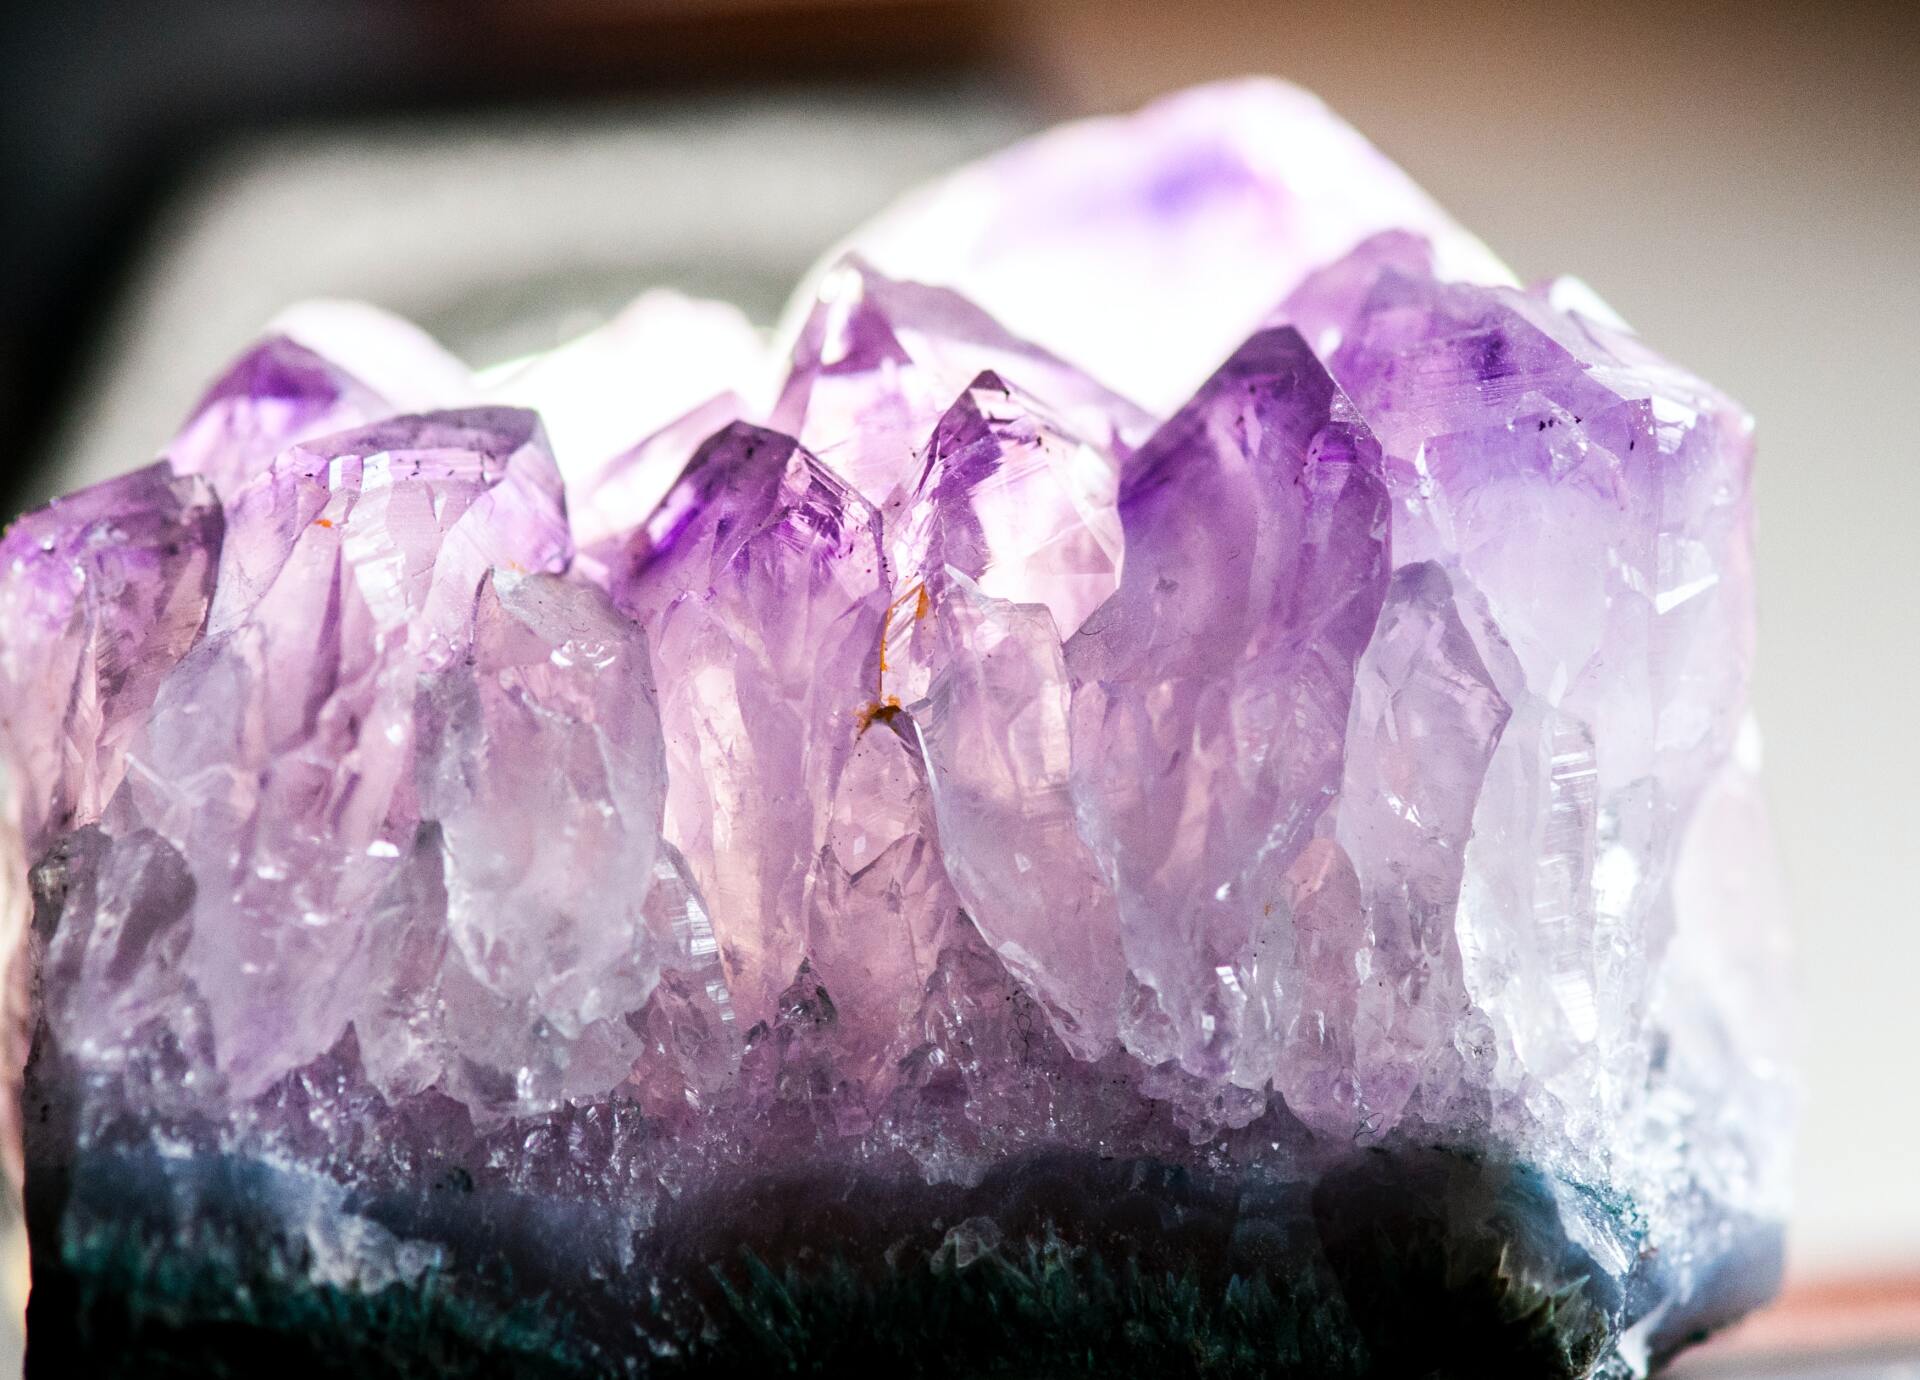 A close up of a purple amethyst crystal on a table.